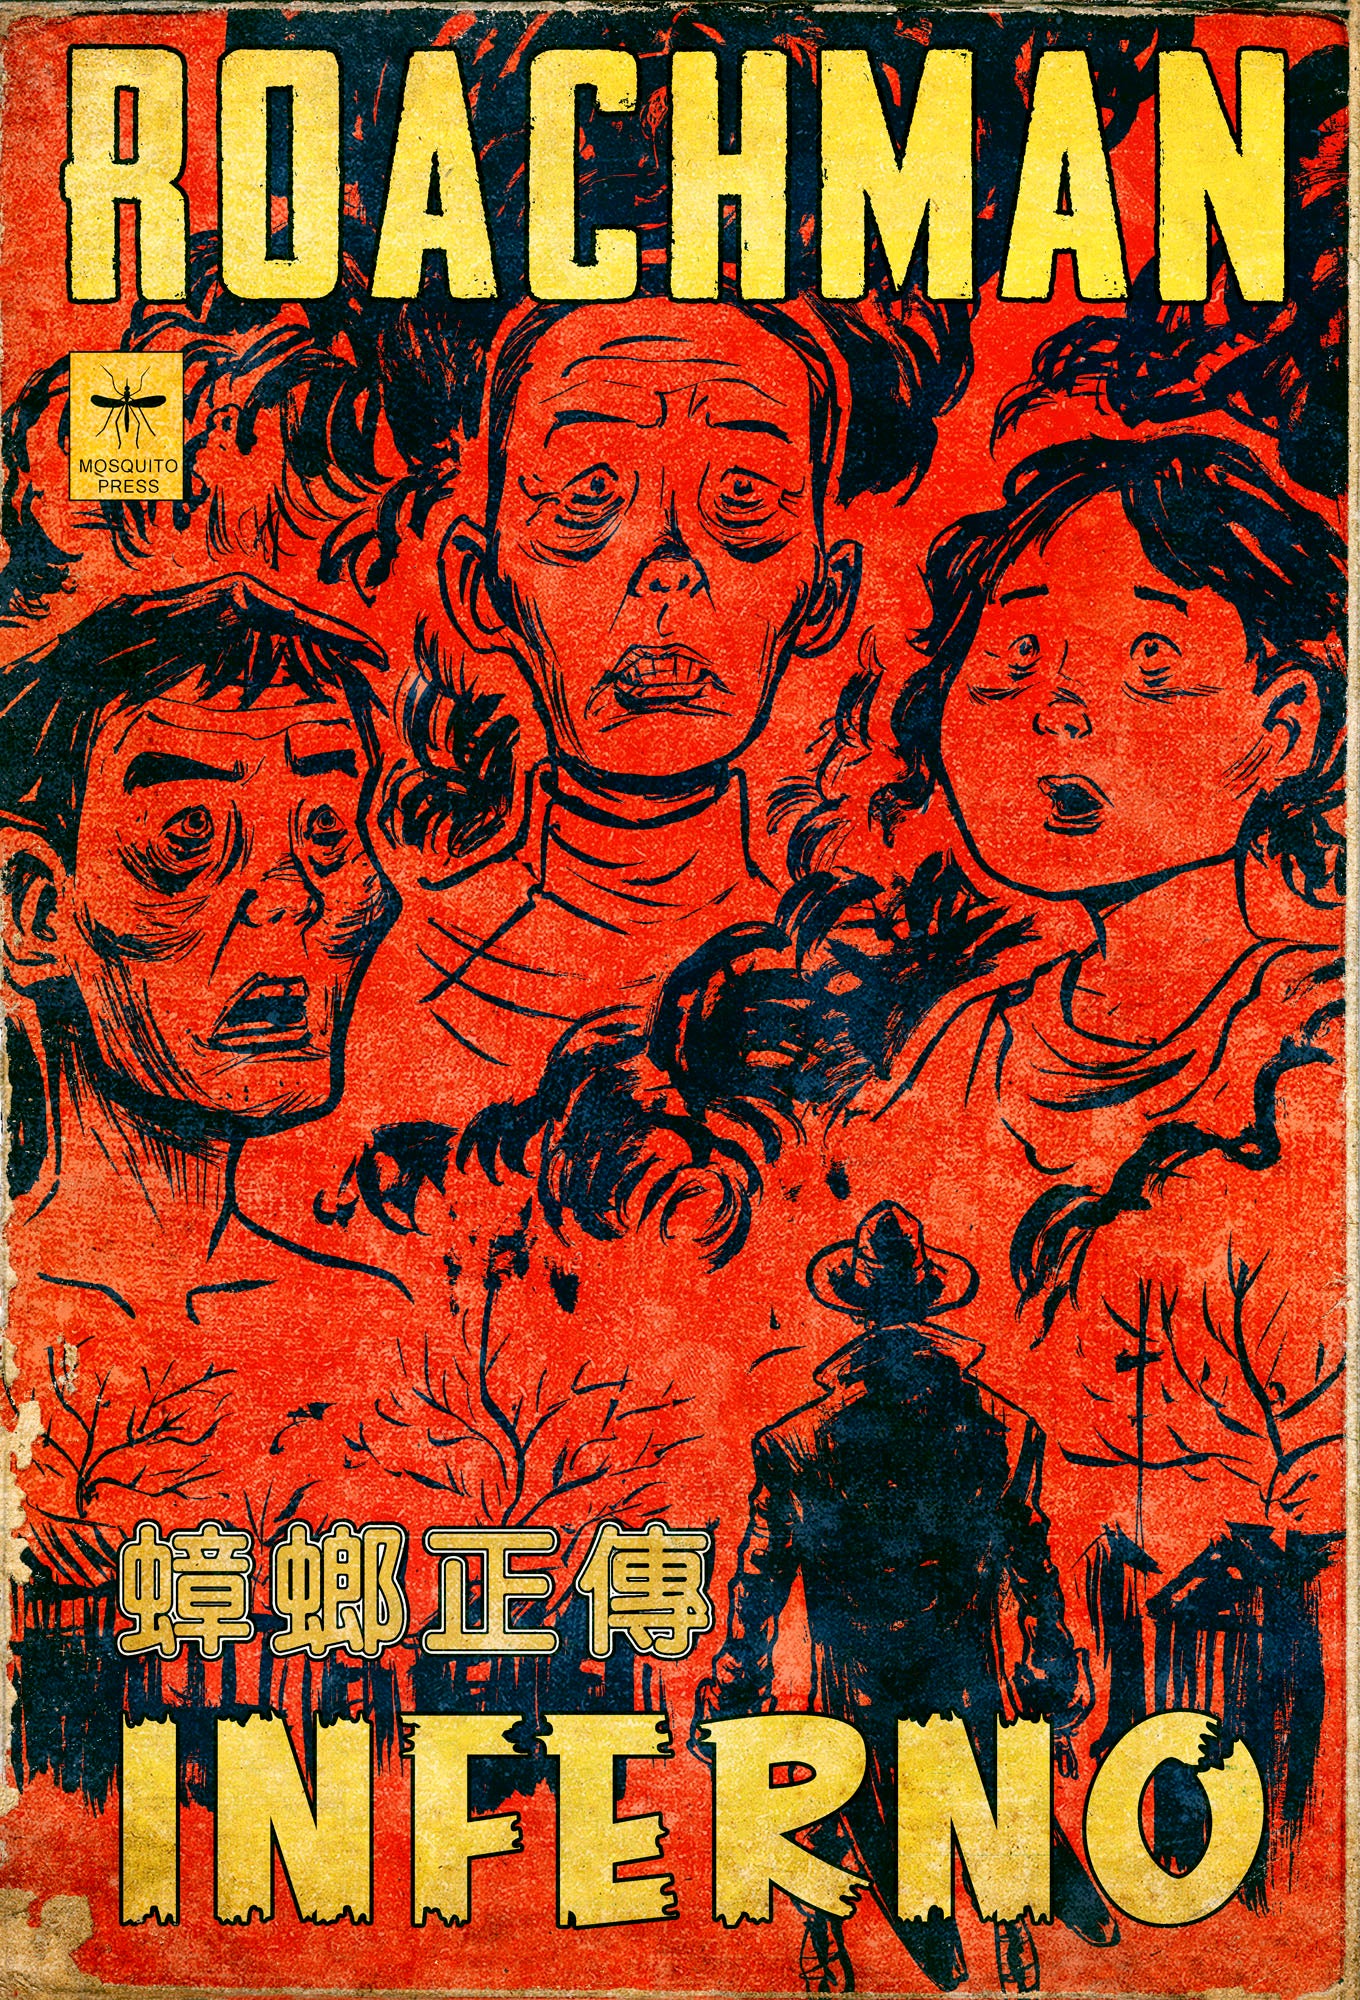 Sonny Liew, "Roachman No. 13: Inferno (Cover)"